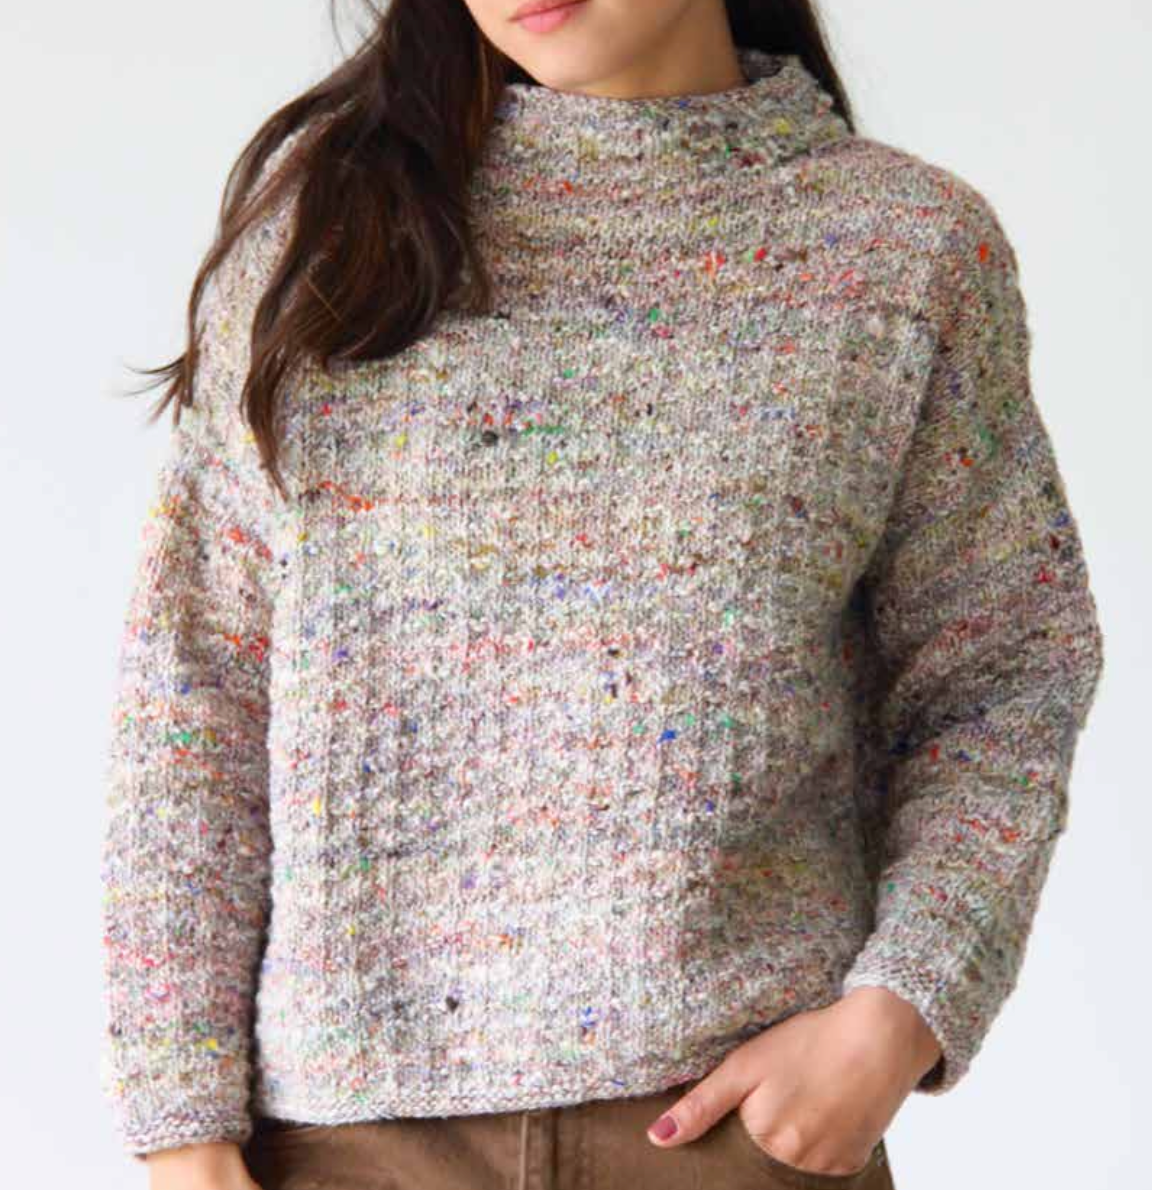 Sia Sweater Pattern by Noro Noro